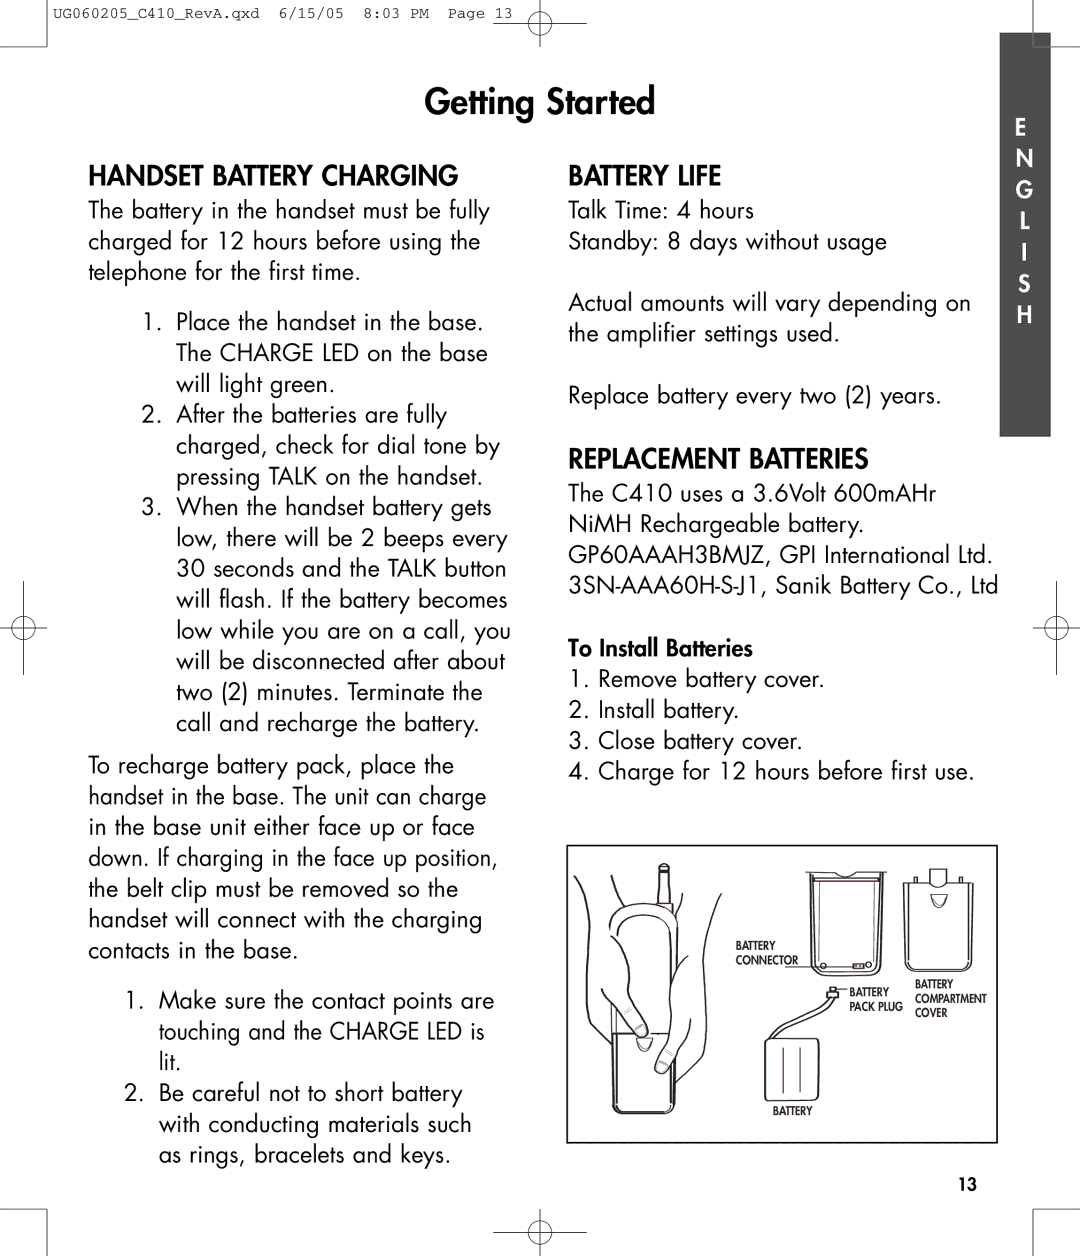 Clarity C410 owner manual Handset Battery Charging, Battery Life, Replacement Batteries 